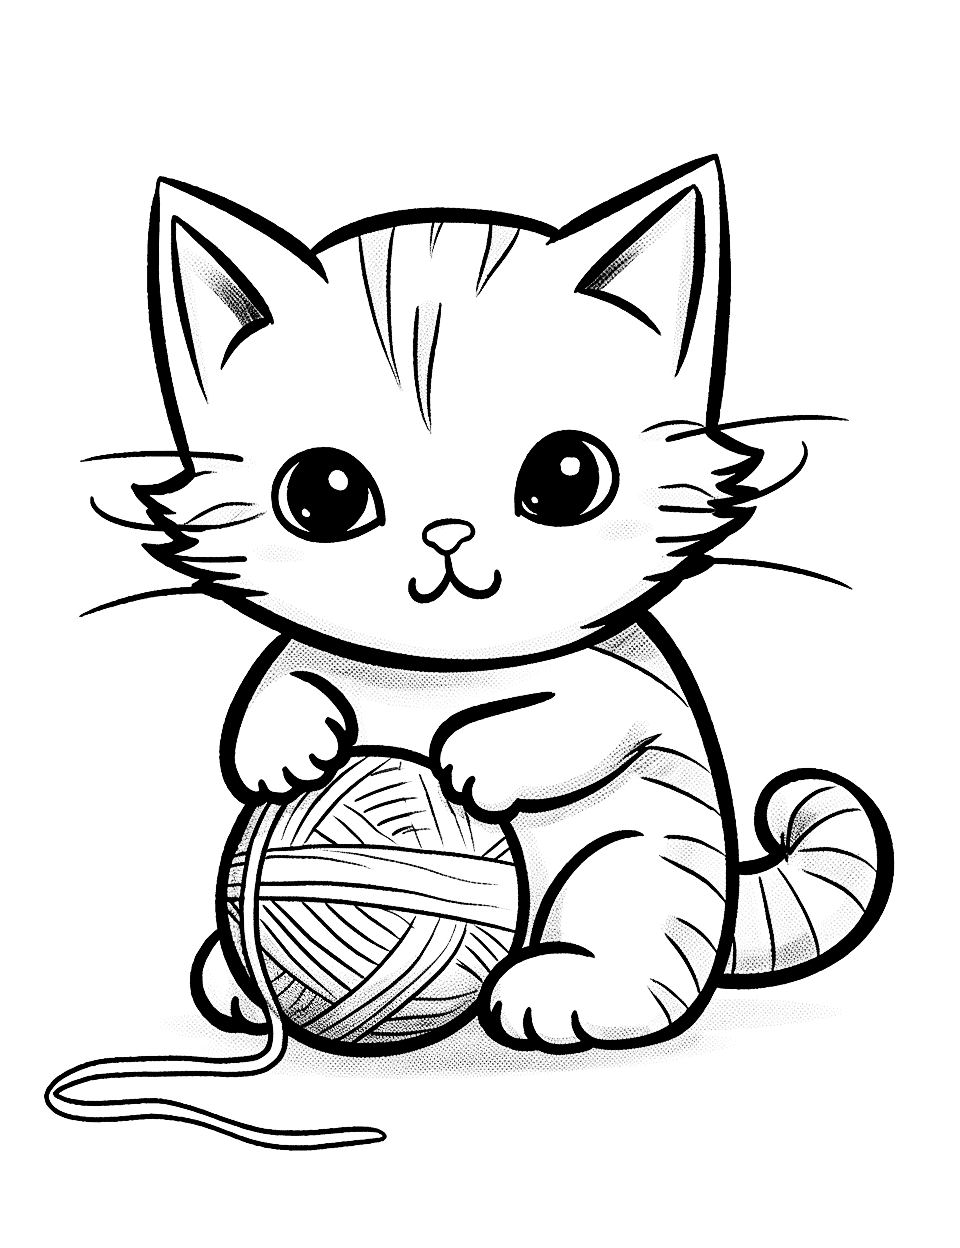 Cute Kitten With a Yarn Ball Coloring Page - A cute kitten playing with a colorful yarn ball.